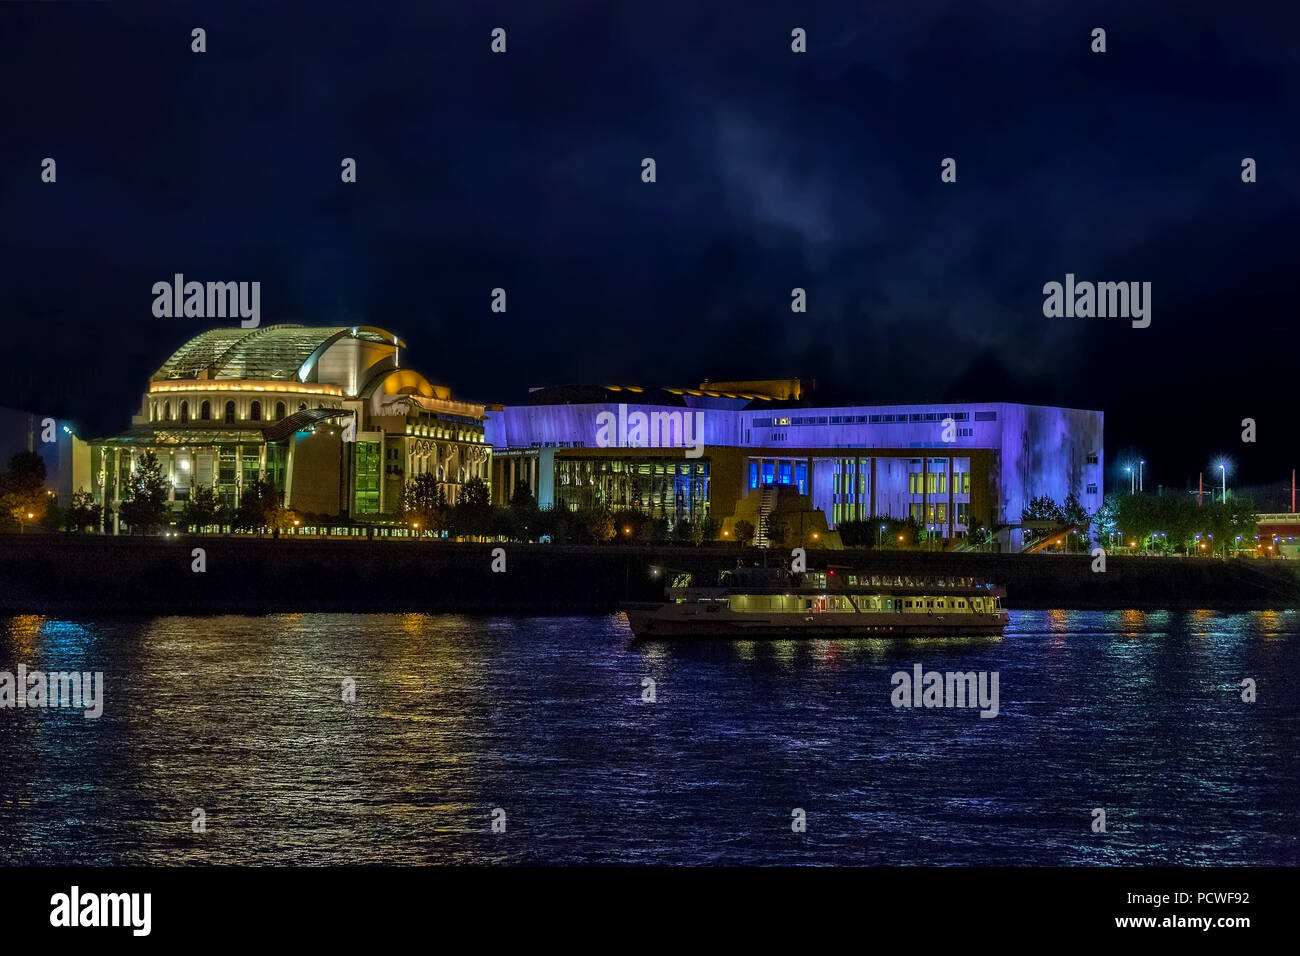 Night view of modern buildings of National Theater and the Palace of Art from the river Danube at Budapest,Hungary. Stock Photo